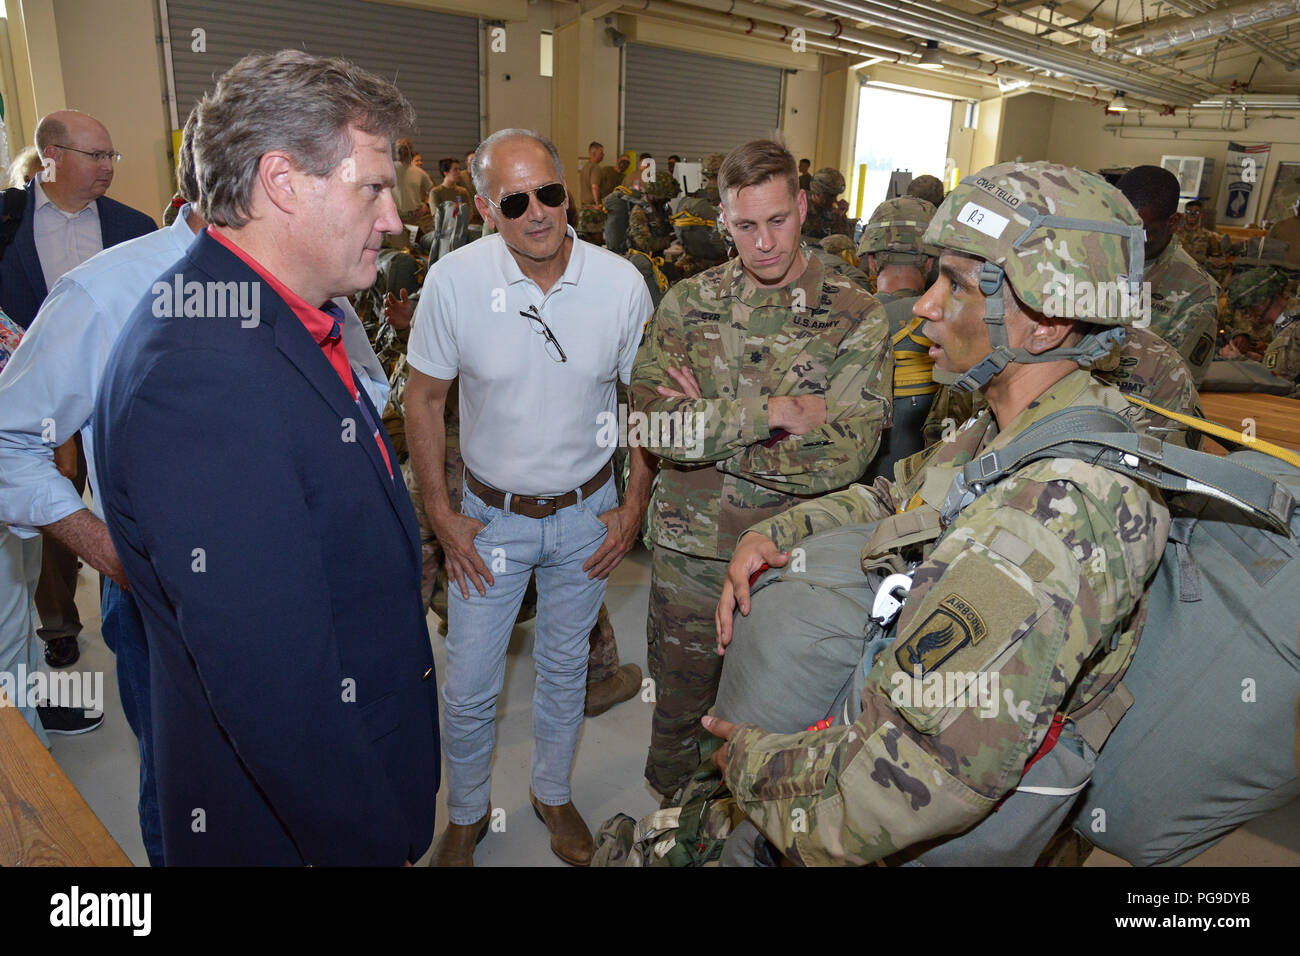 From Left, U.S. Rep. Michael Turner, U.S. Rep. Tom Marino and Army Lt. Col. Kurt Cyr listen to a brief from Chief Warrant Officer 2 Emmanuel Tello, assigned to 173rd Airborne Brigade in the Personnel Alert Holding Area (PAHA), during a Congressional Delegation visit to Aviano Air Base, Italy, Aug. 23, 2018. The 173rd Airborne Brigade is the U.S. Army Contingency Response Force in Europe, capable of projecting ready forces anywhere in the U.S. European, Africa or Central Commands' areas of responsibility. (U.S. Army photo by Paolo Bovo) Stock Photo